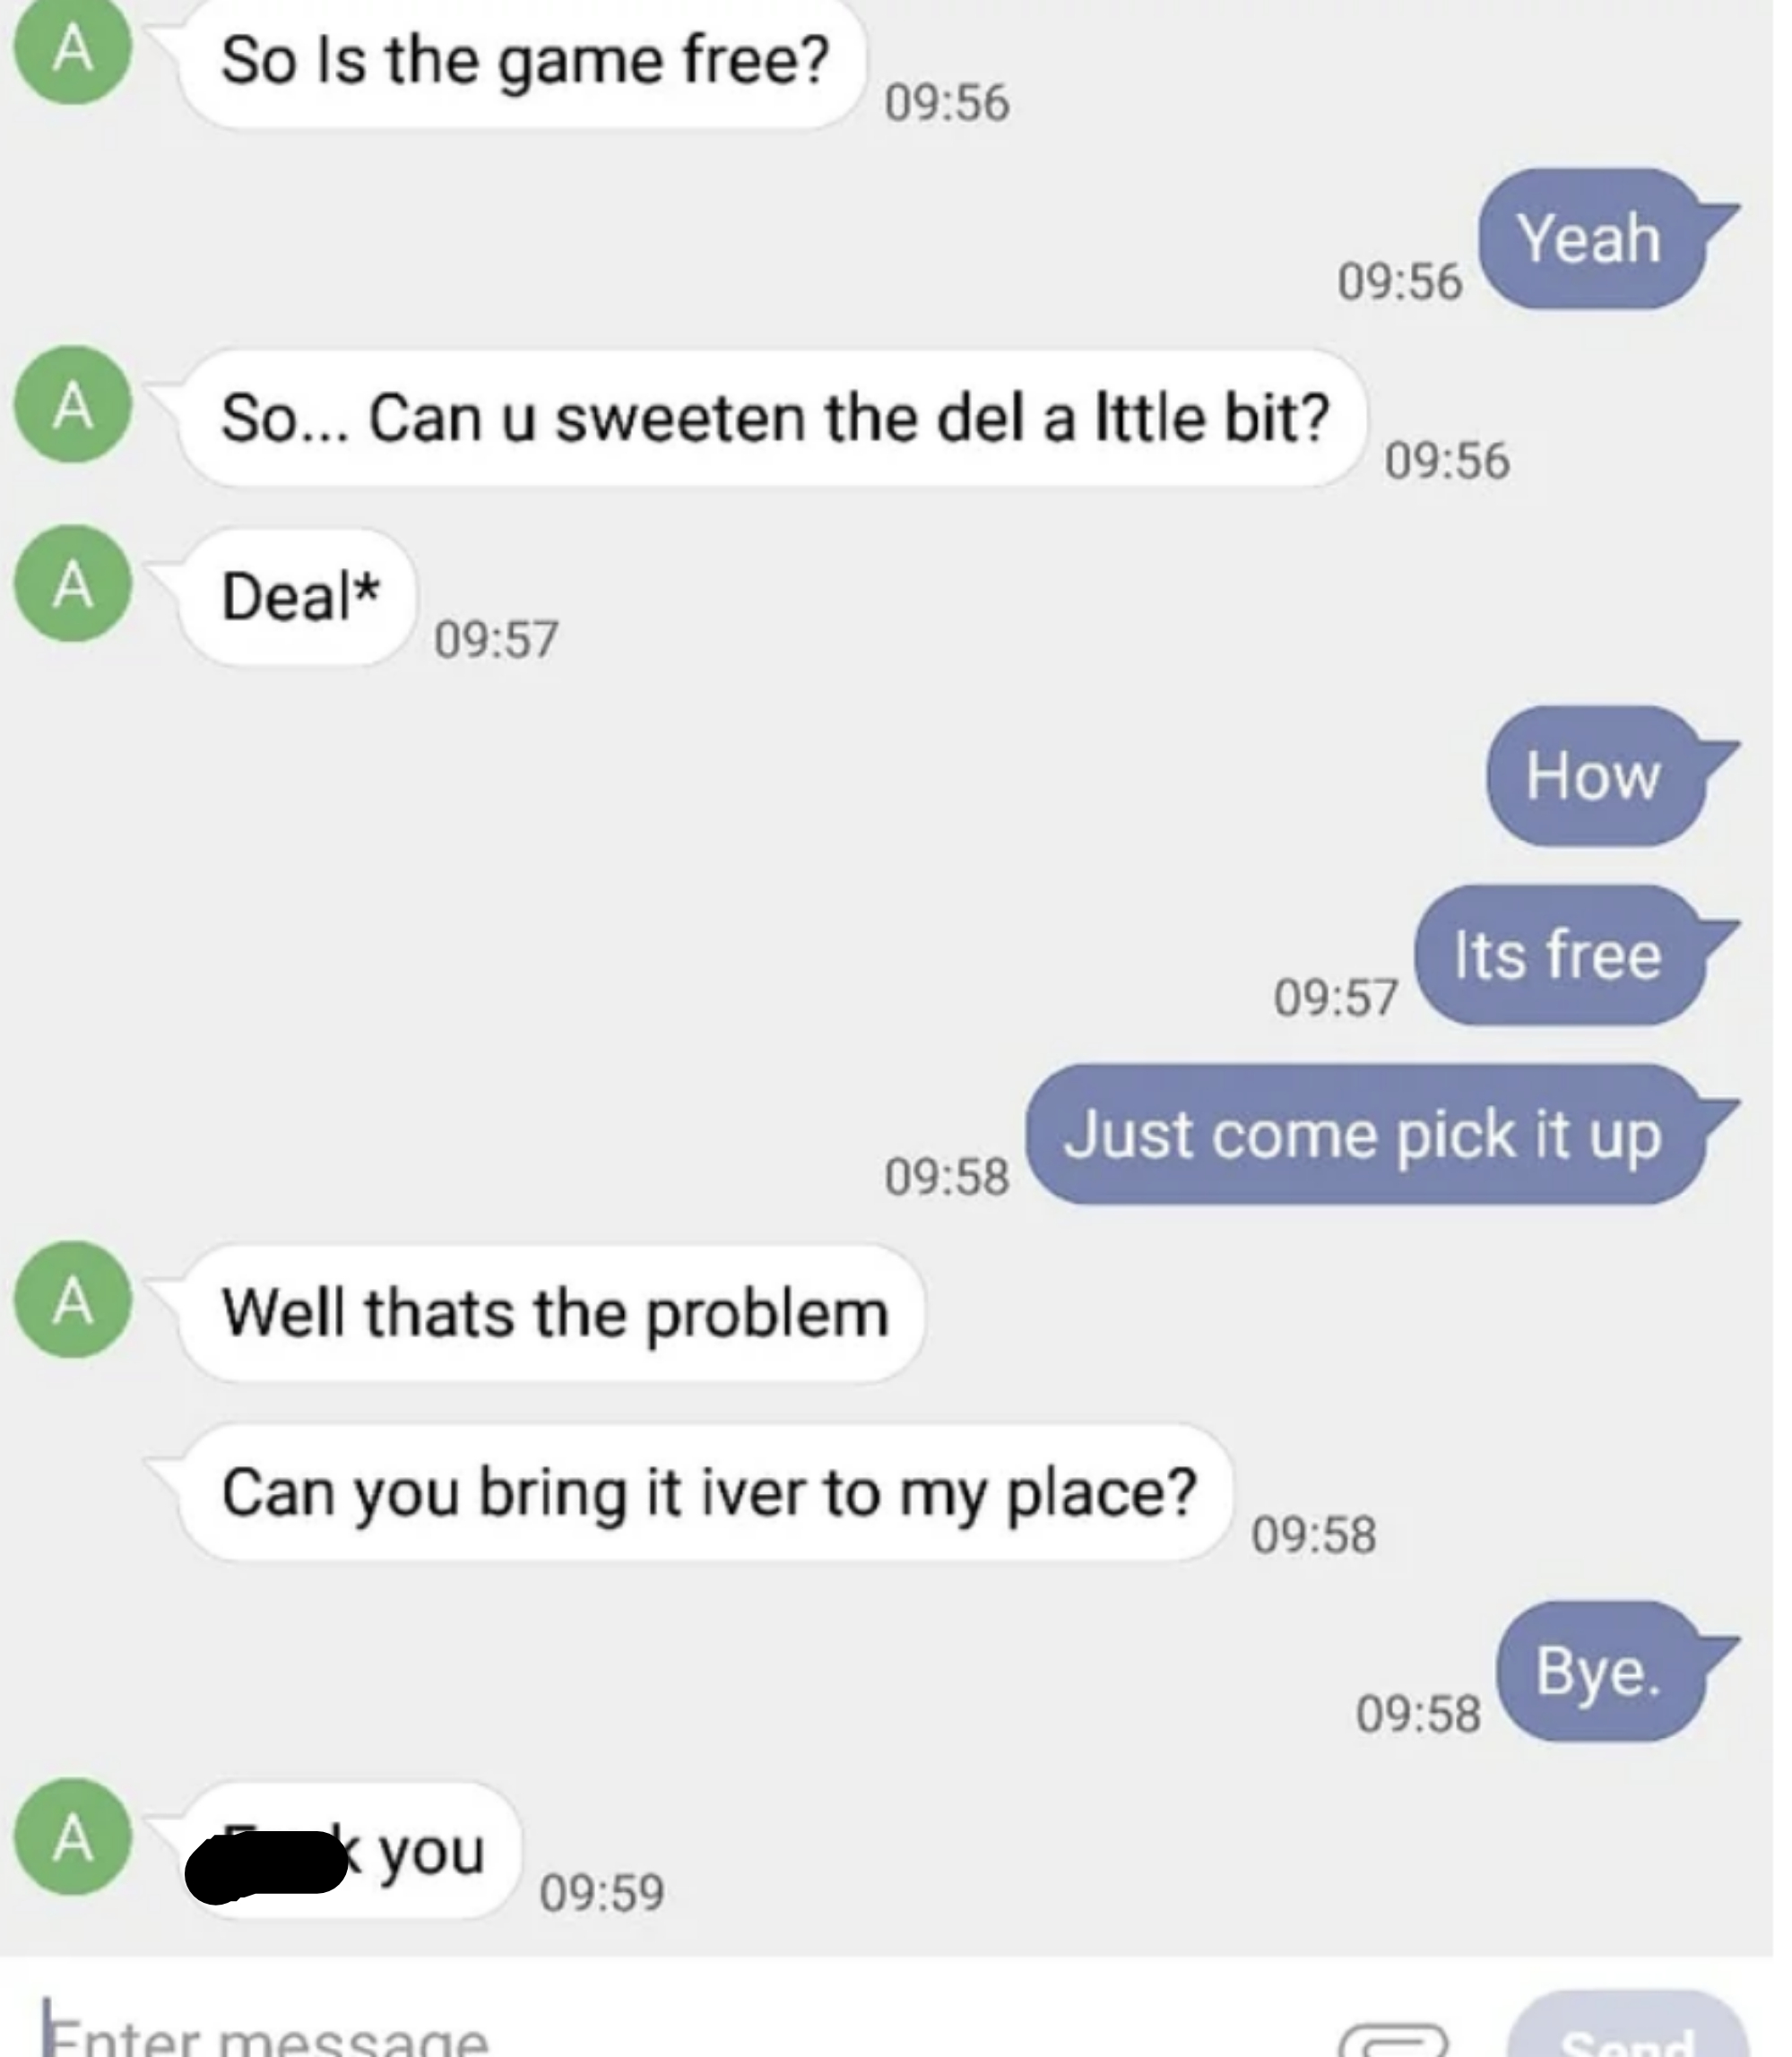 Someone is giving away a game for free, and a person texts asking if they can sweeten the deal by delivering it to them